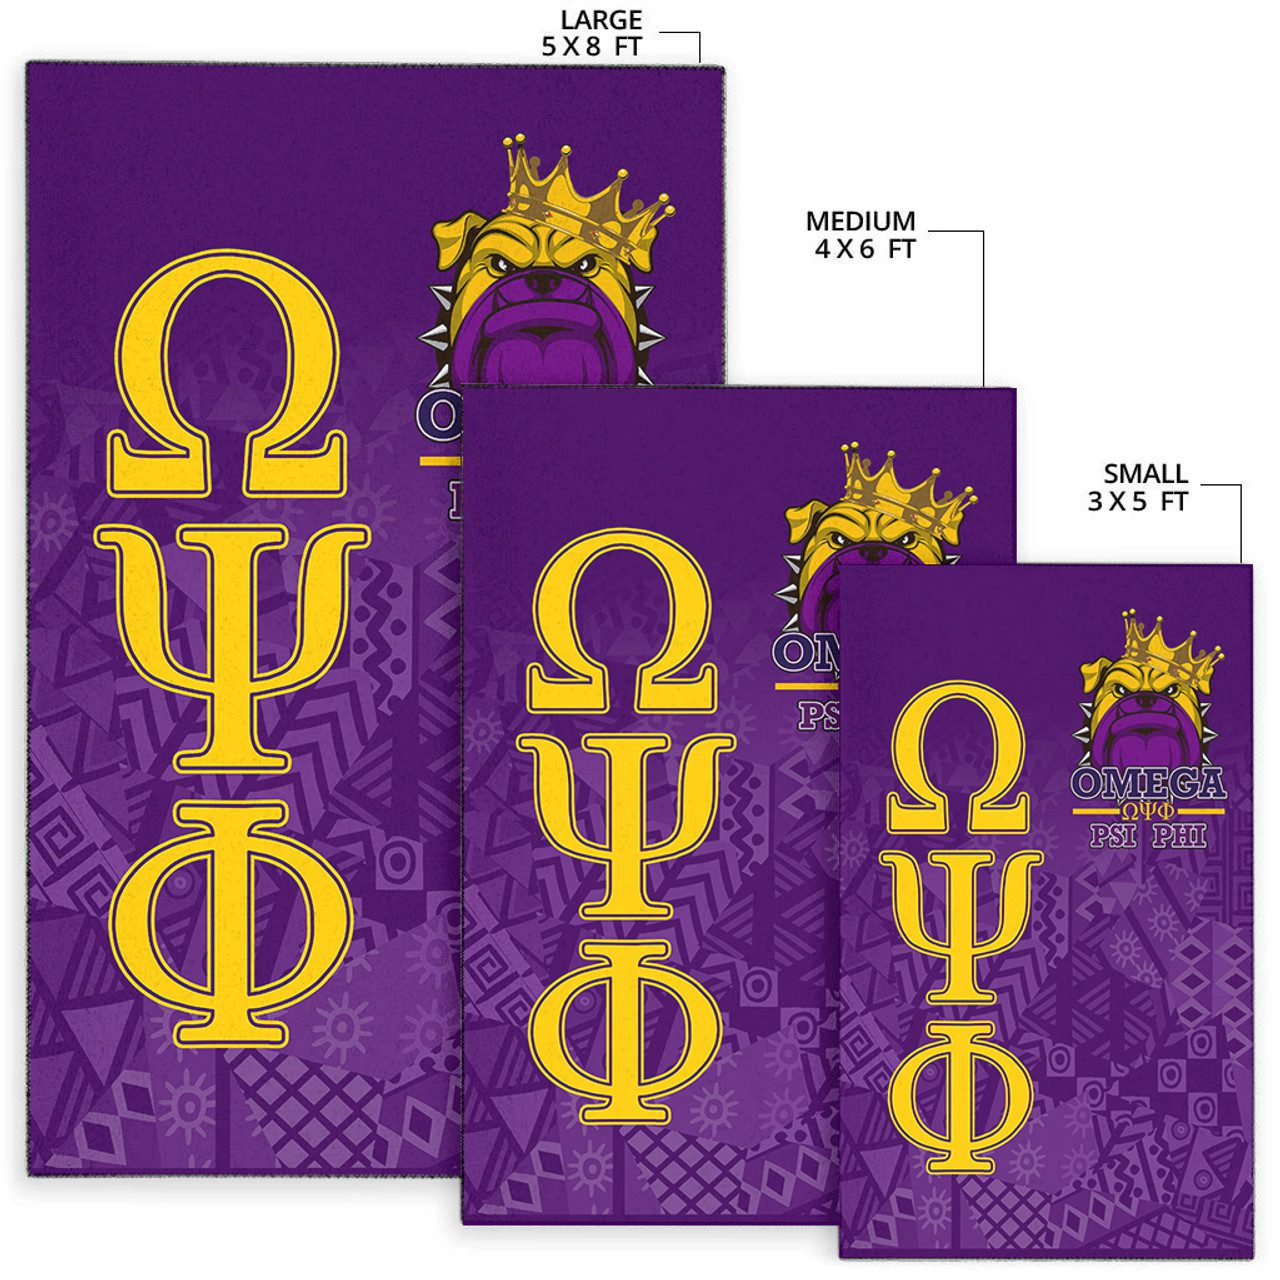 Omega Psi Phi Area Rug – Fraternity Black Roots Area Rug